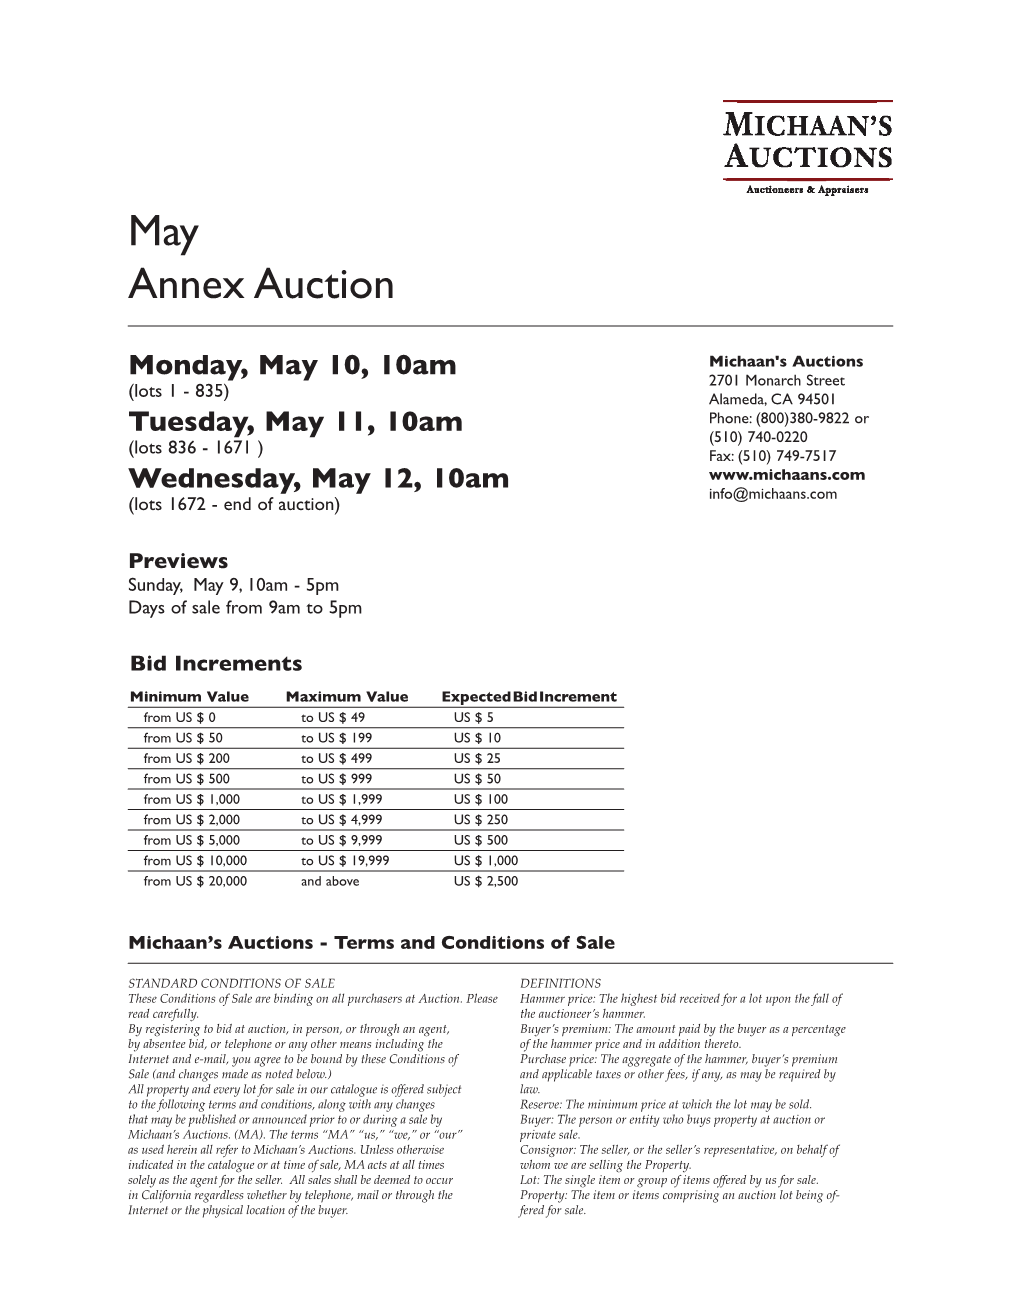 May Annex Auction